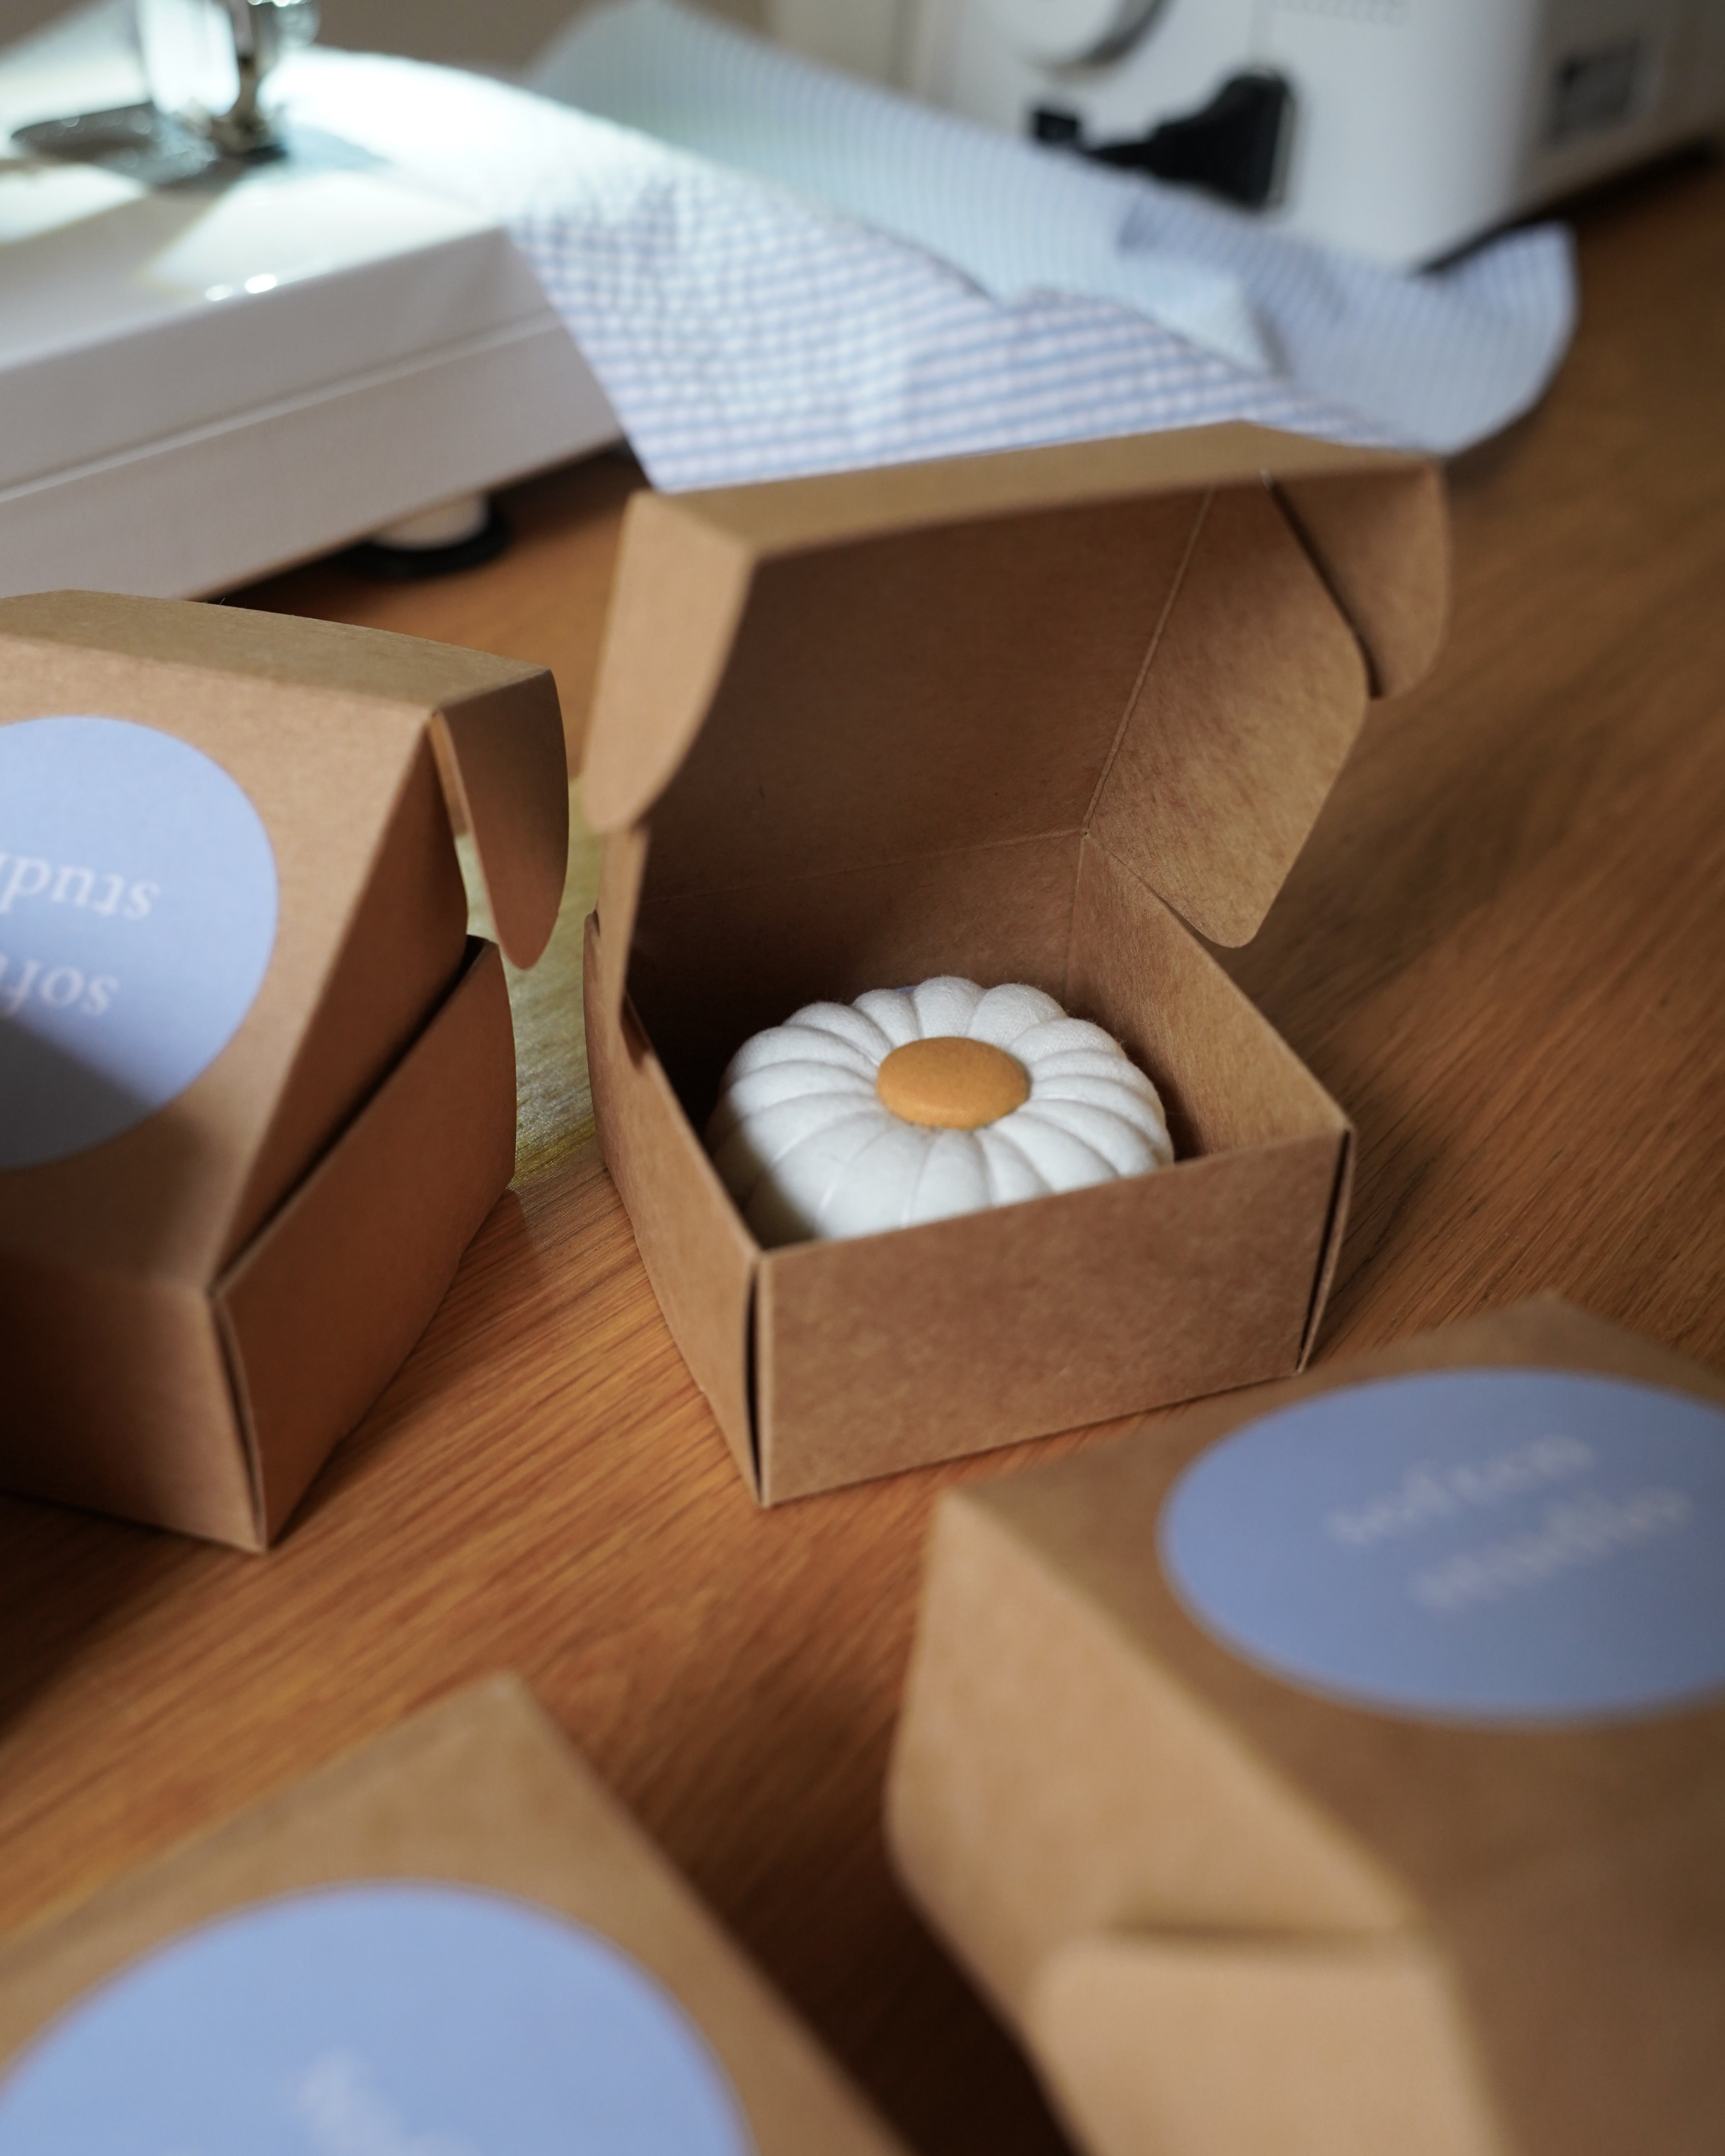 Soften Studio pin cushion is displayed in a box